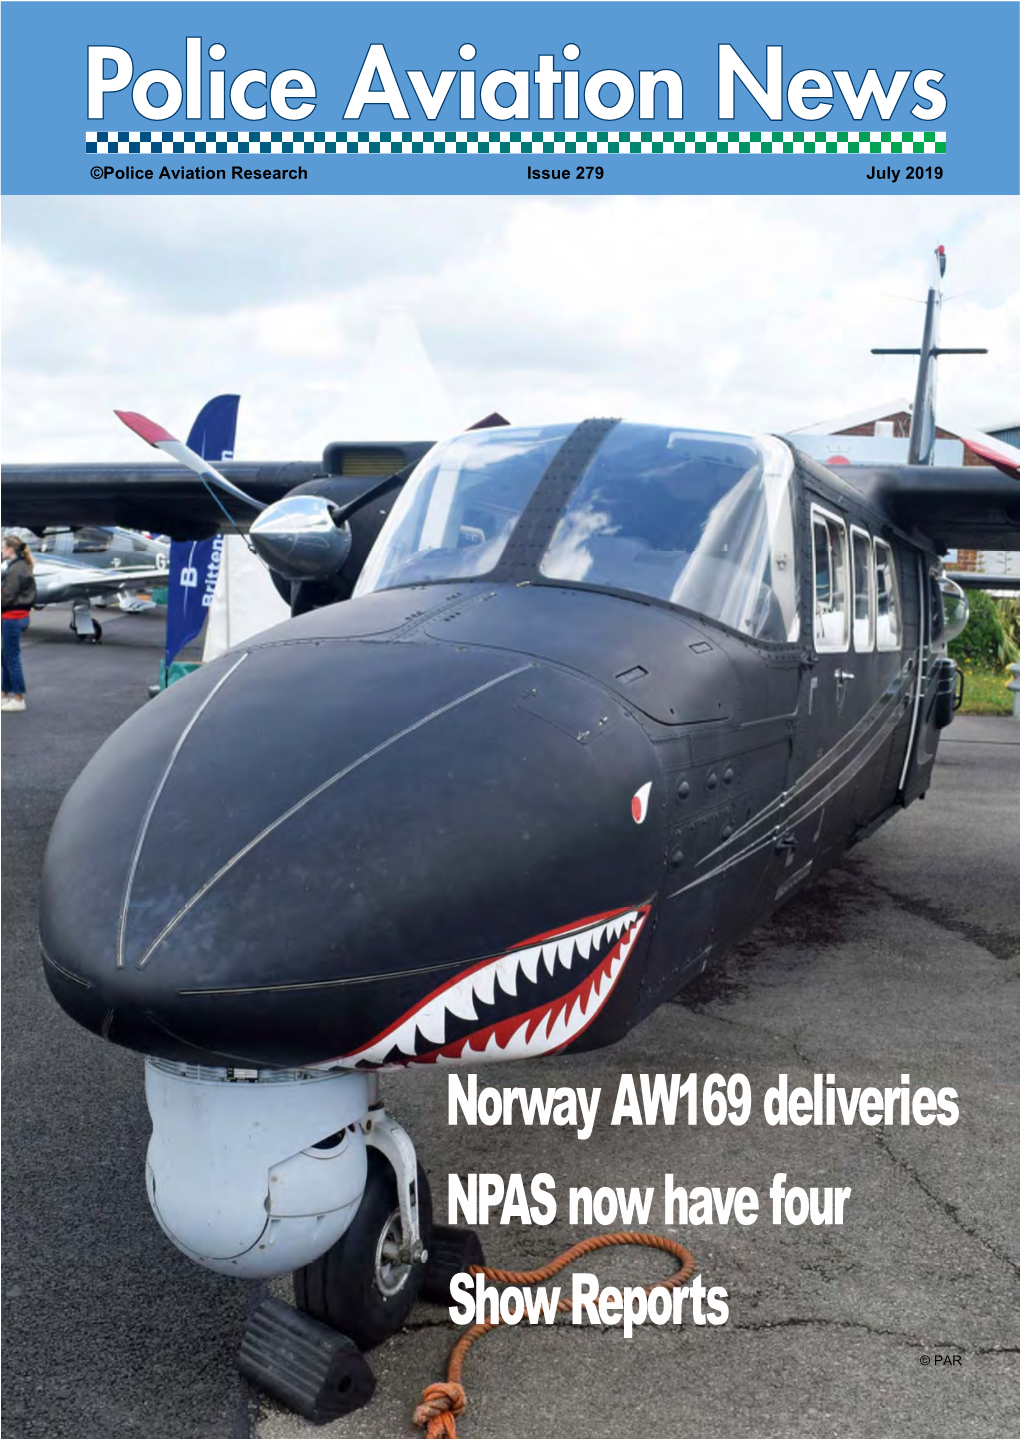 Police Aviation News 279 July 2019 1 # ©Police Aviation Research Issue